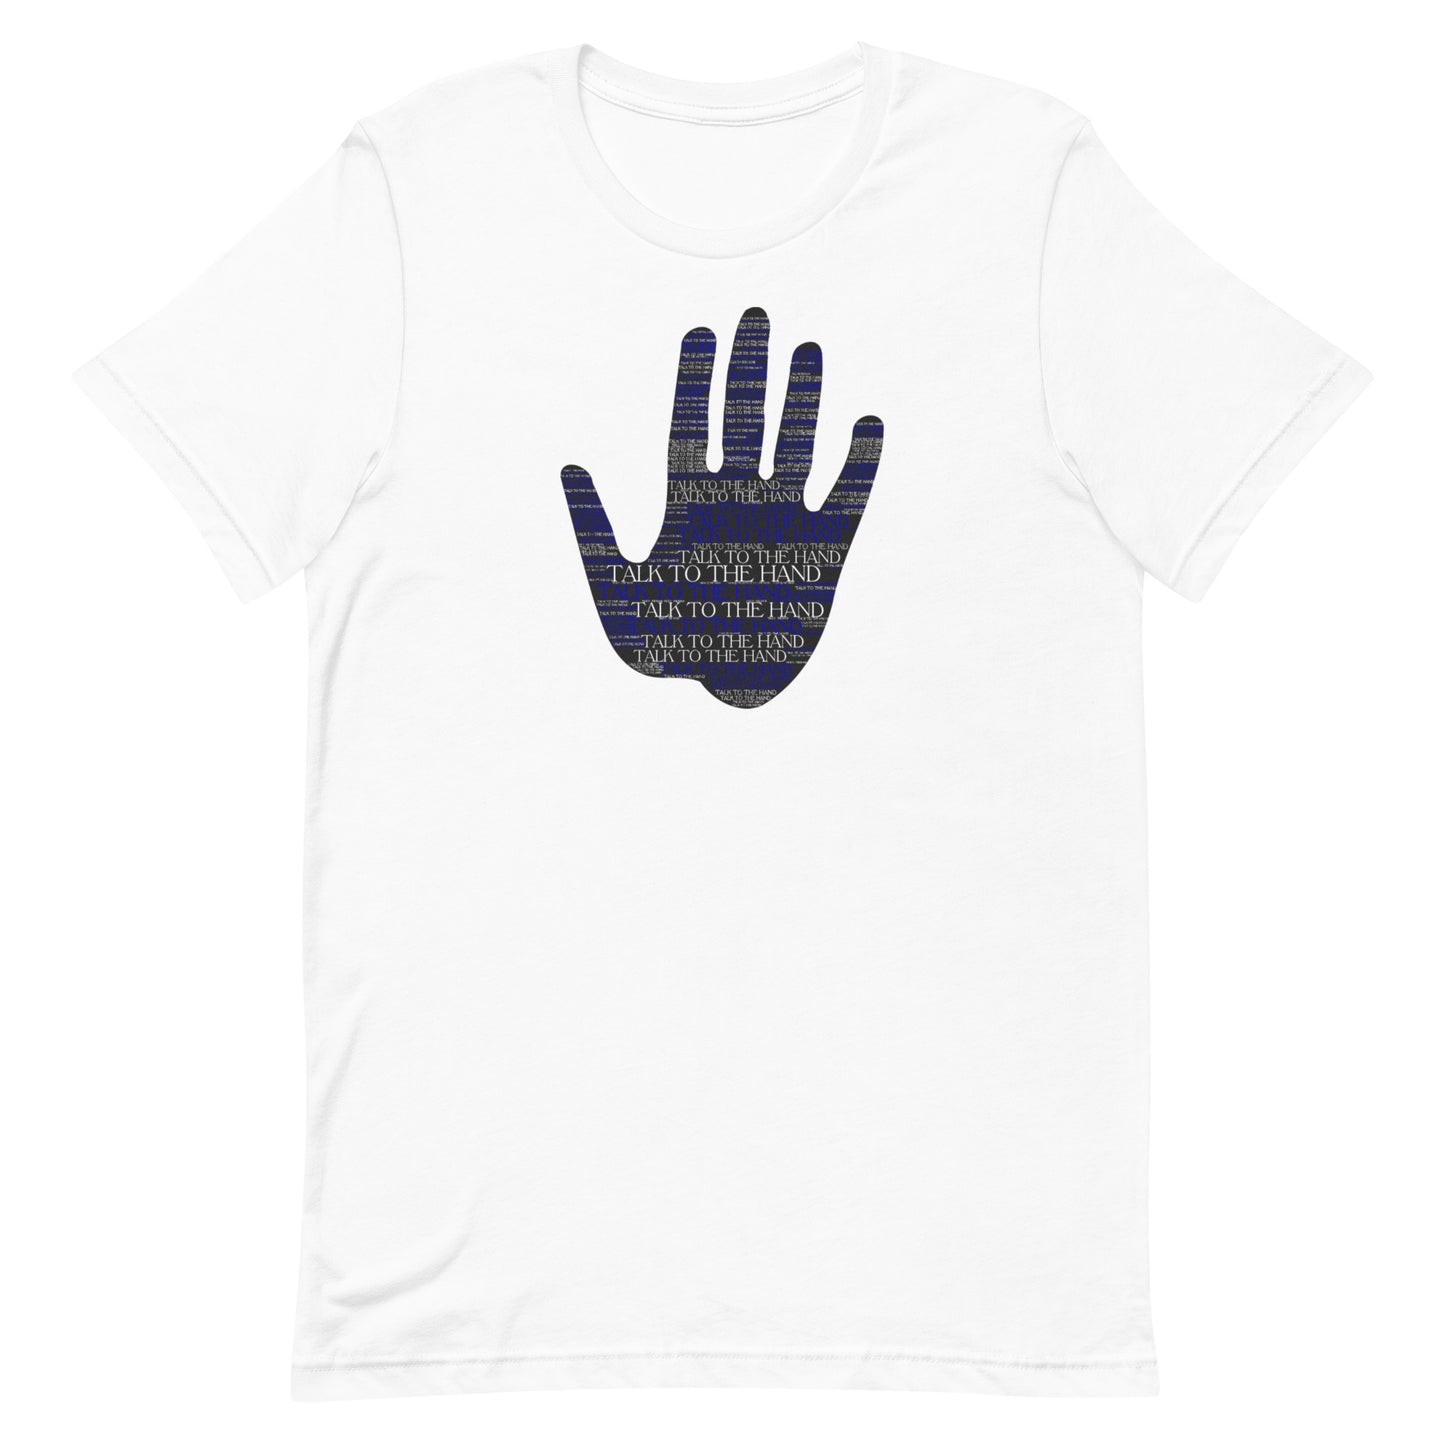 Talk to the Hand - ROYAL BLUE - S-4XL